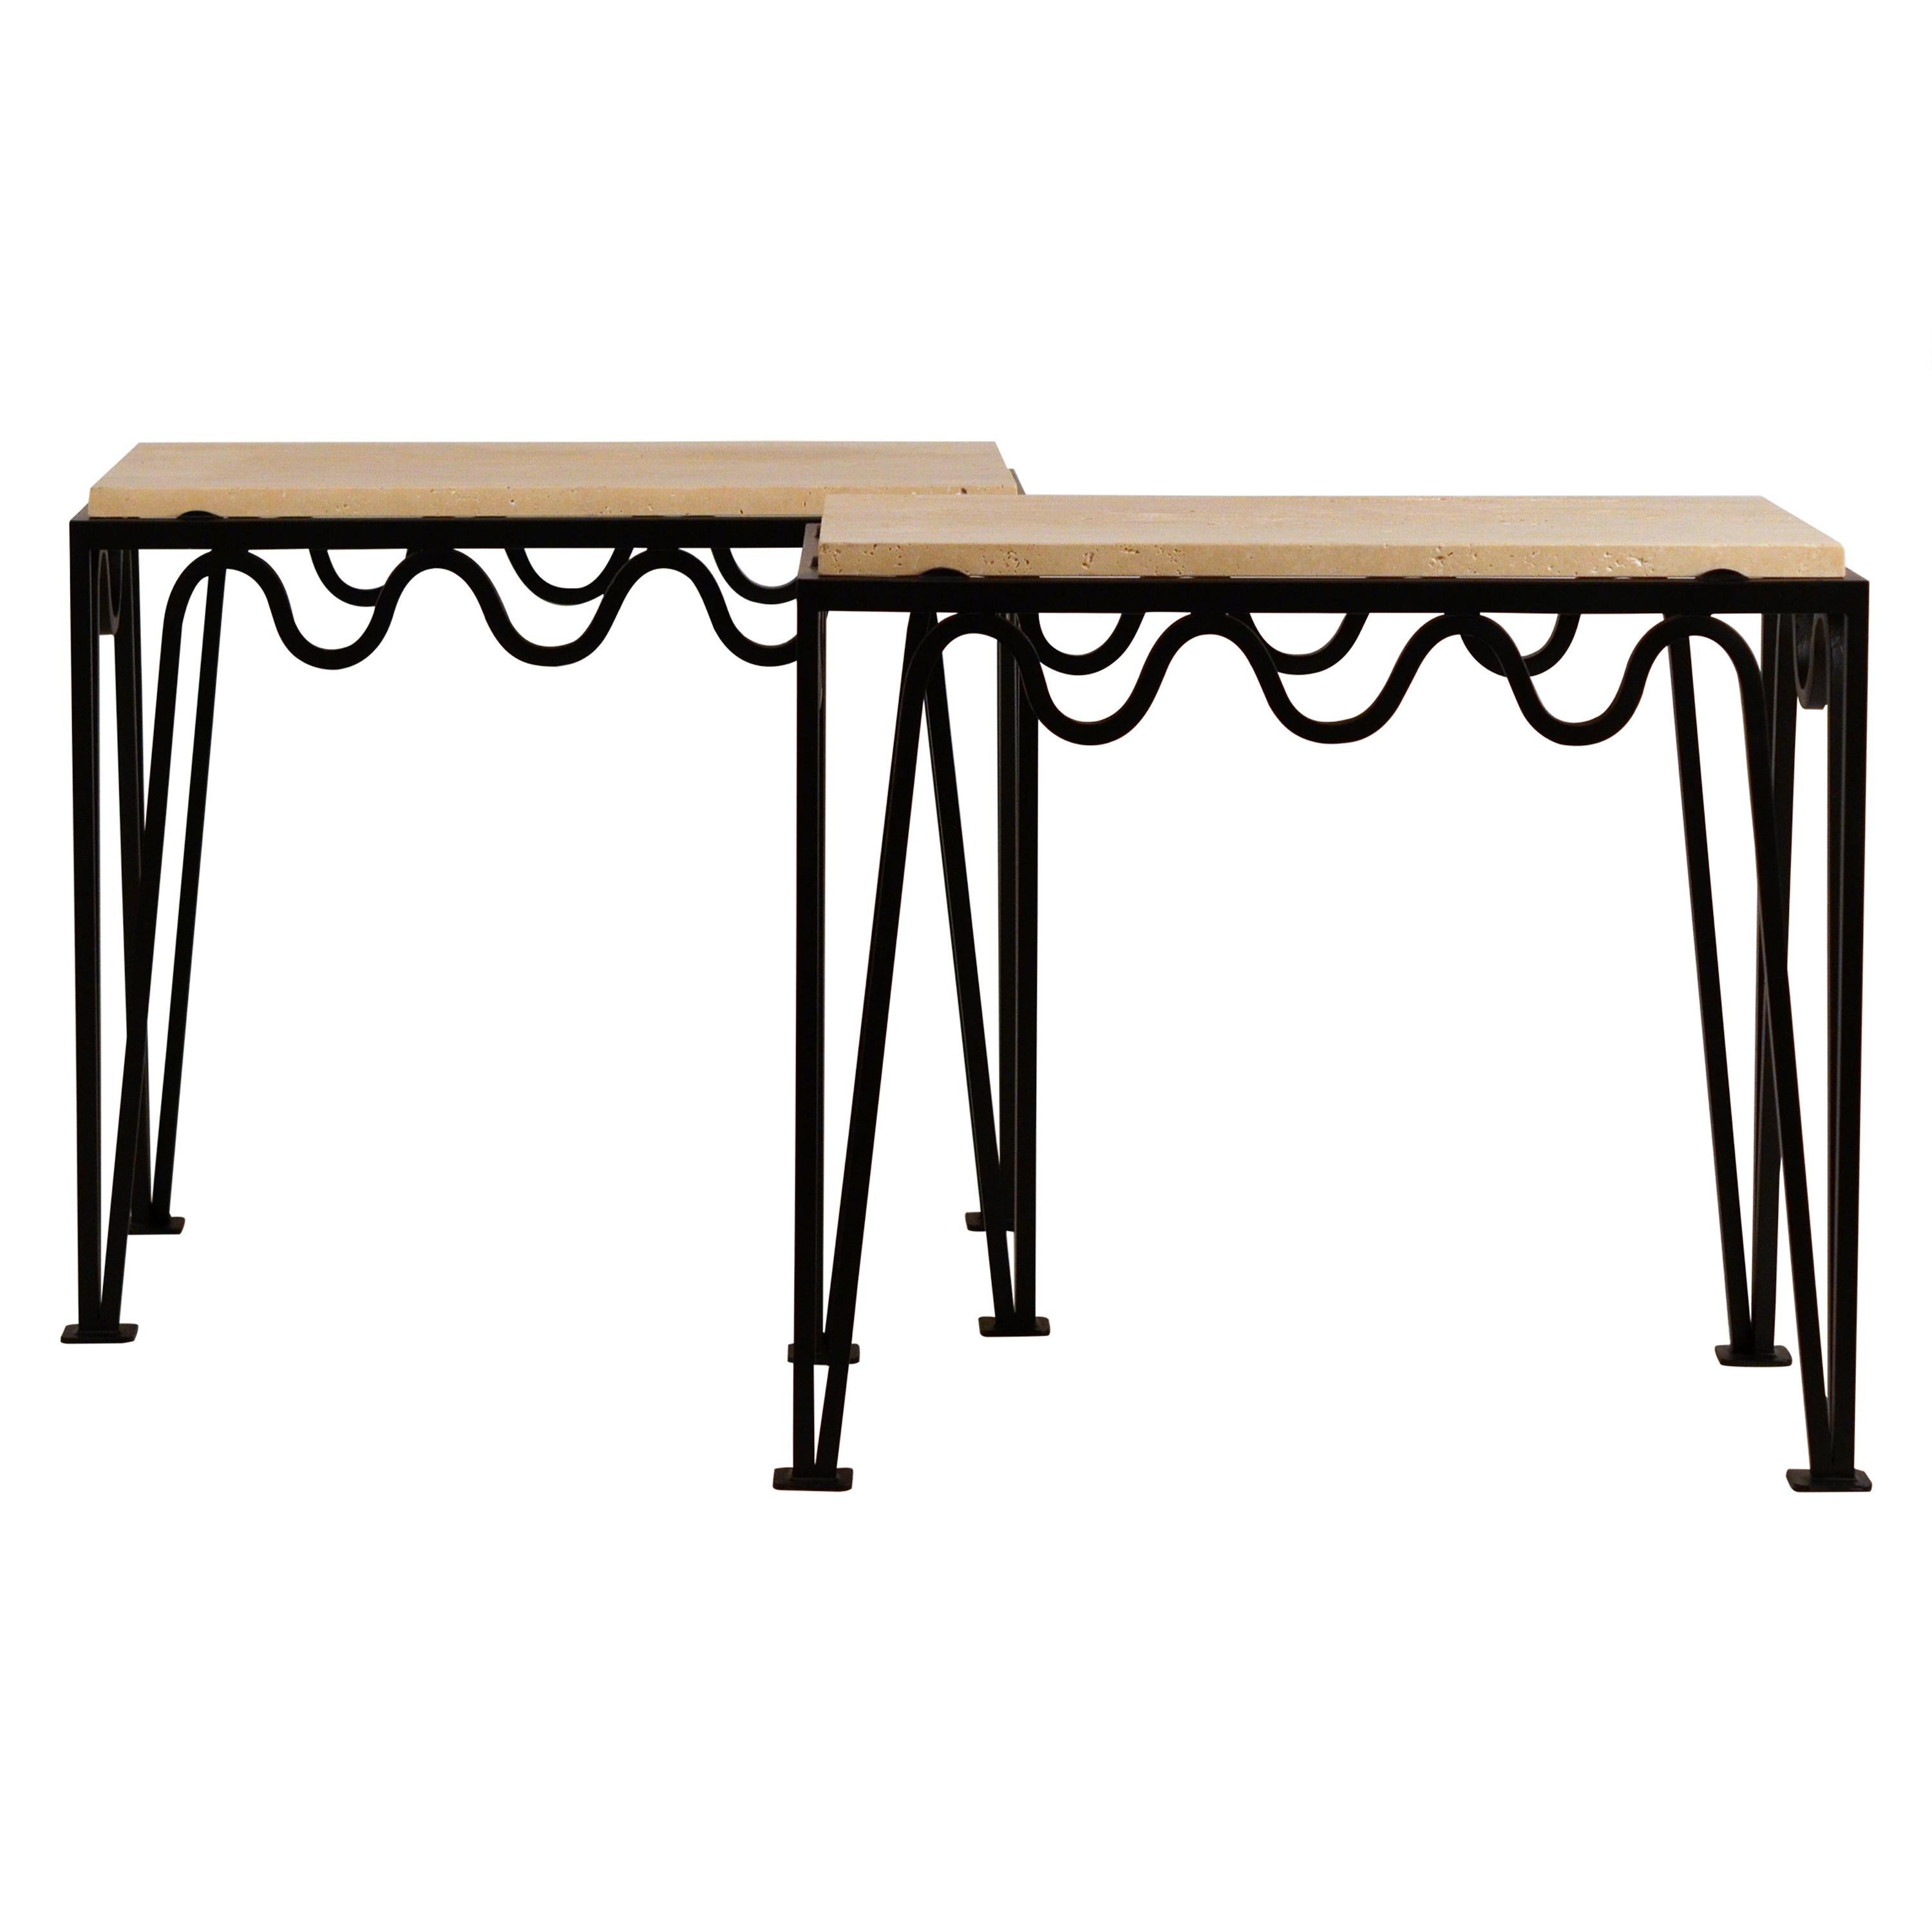 Pair of Chic 'Méandre' Black Iron and Travertine Side Tables by Design Frères For Sale